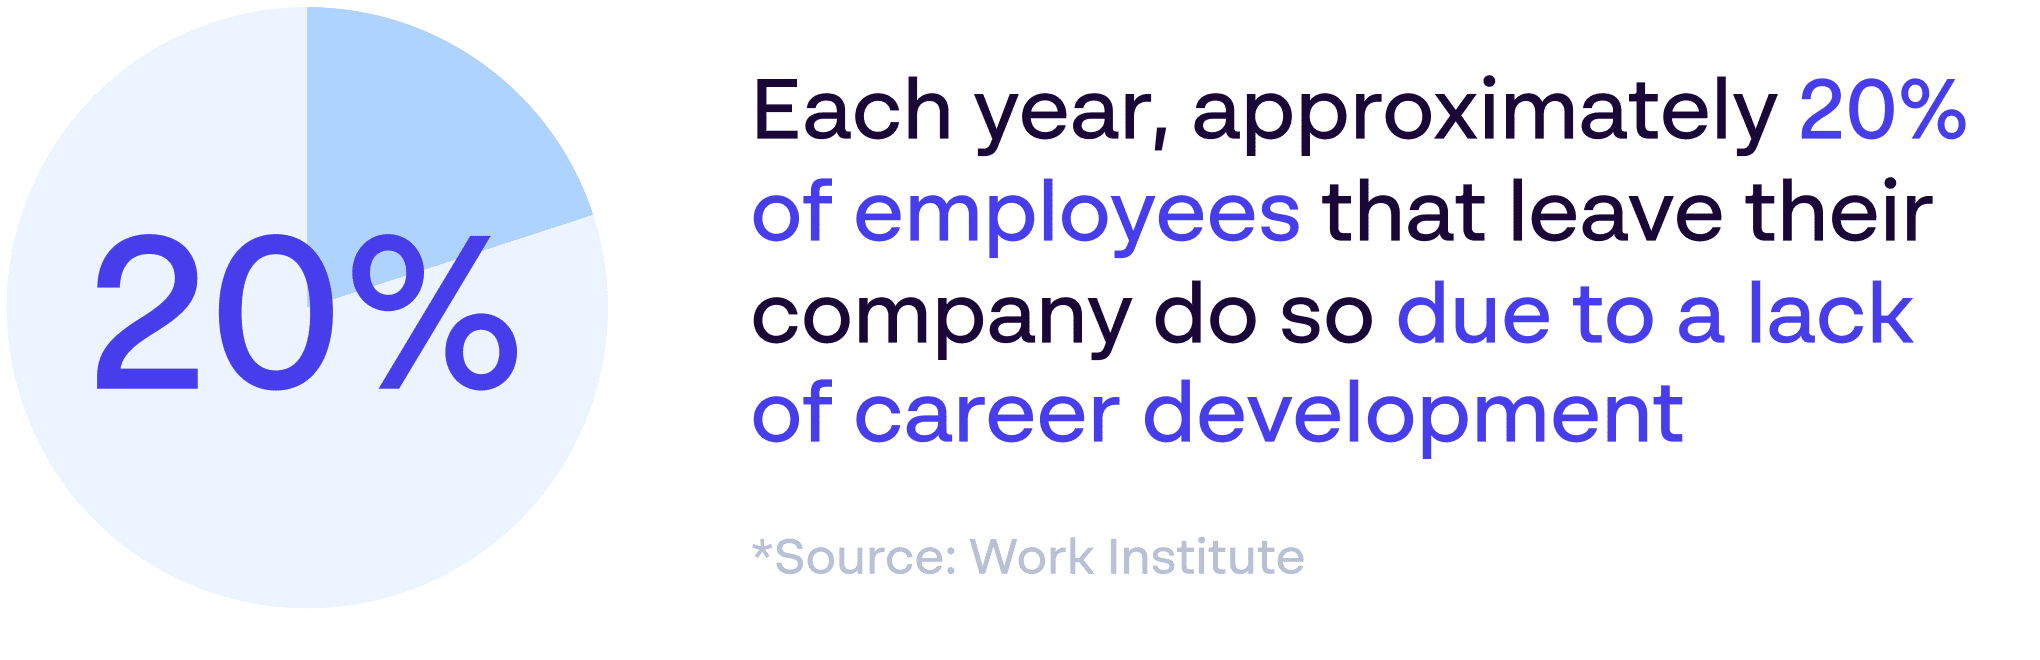 Each year, approximately 20% of employees that leave their company do so due to a lack of career development